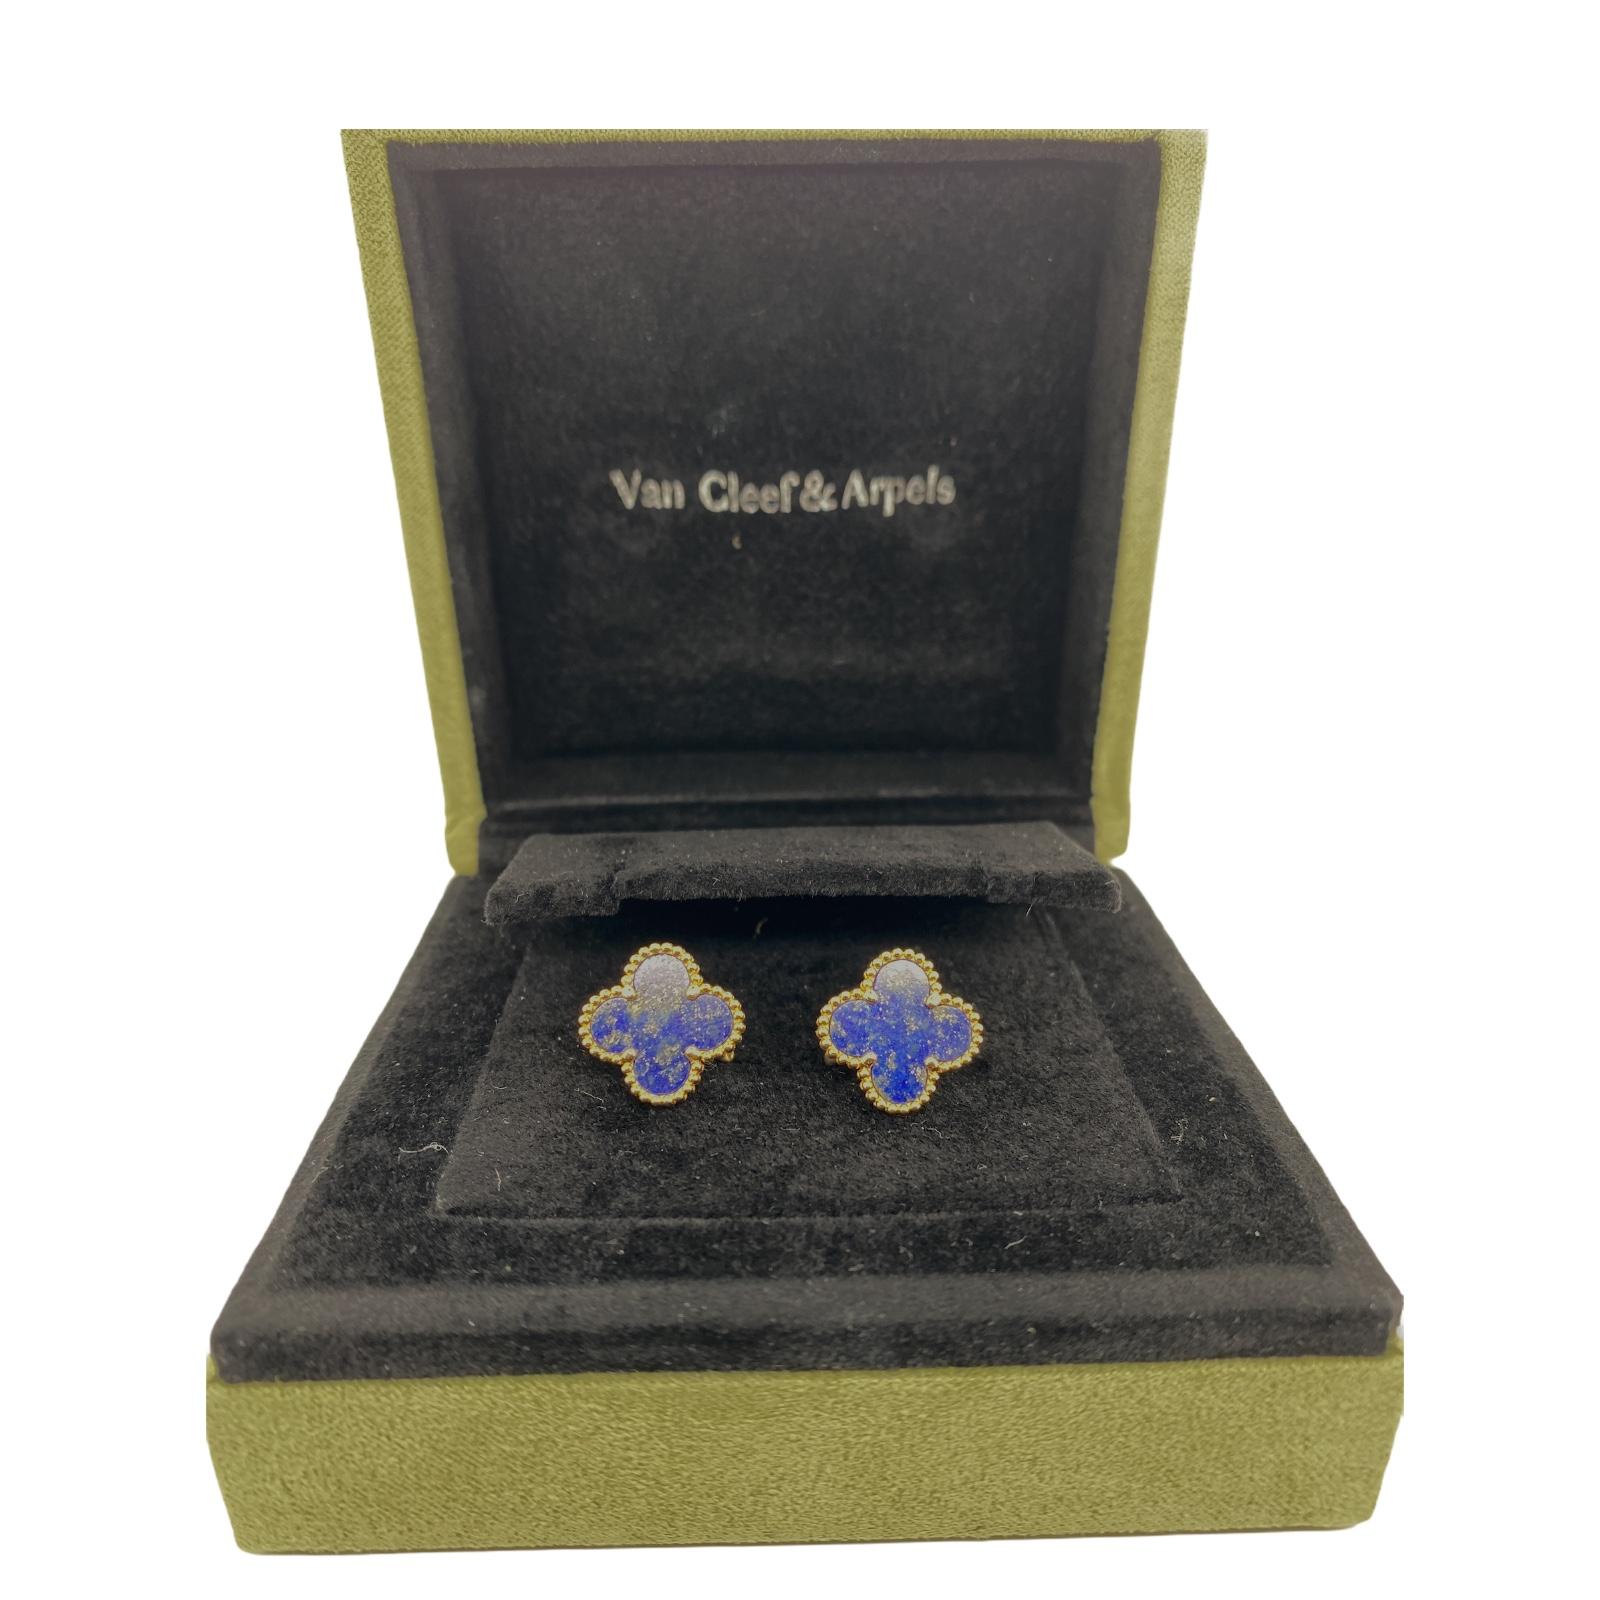 Van Cleef & Arpels lapis lazuli Alhambra earrings fashioned in 18 karat yellow gold. The earrings feature two lapis lazuli gemstones set in a clover motif. The Alhambra earrings with lapis are no longer available. The earrings measure 14.75 x